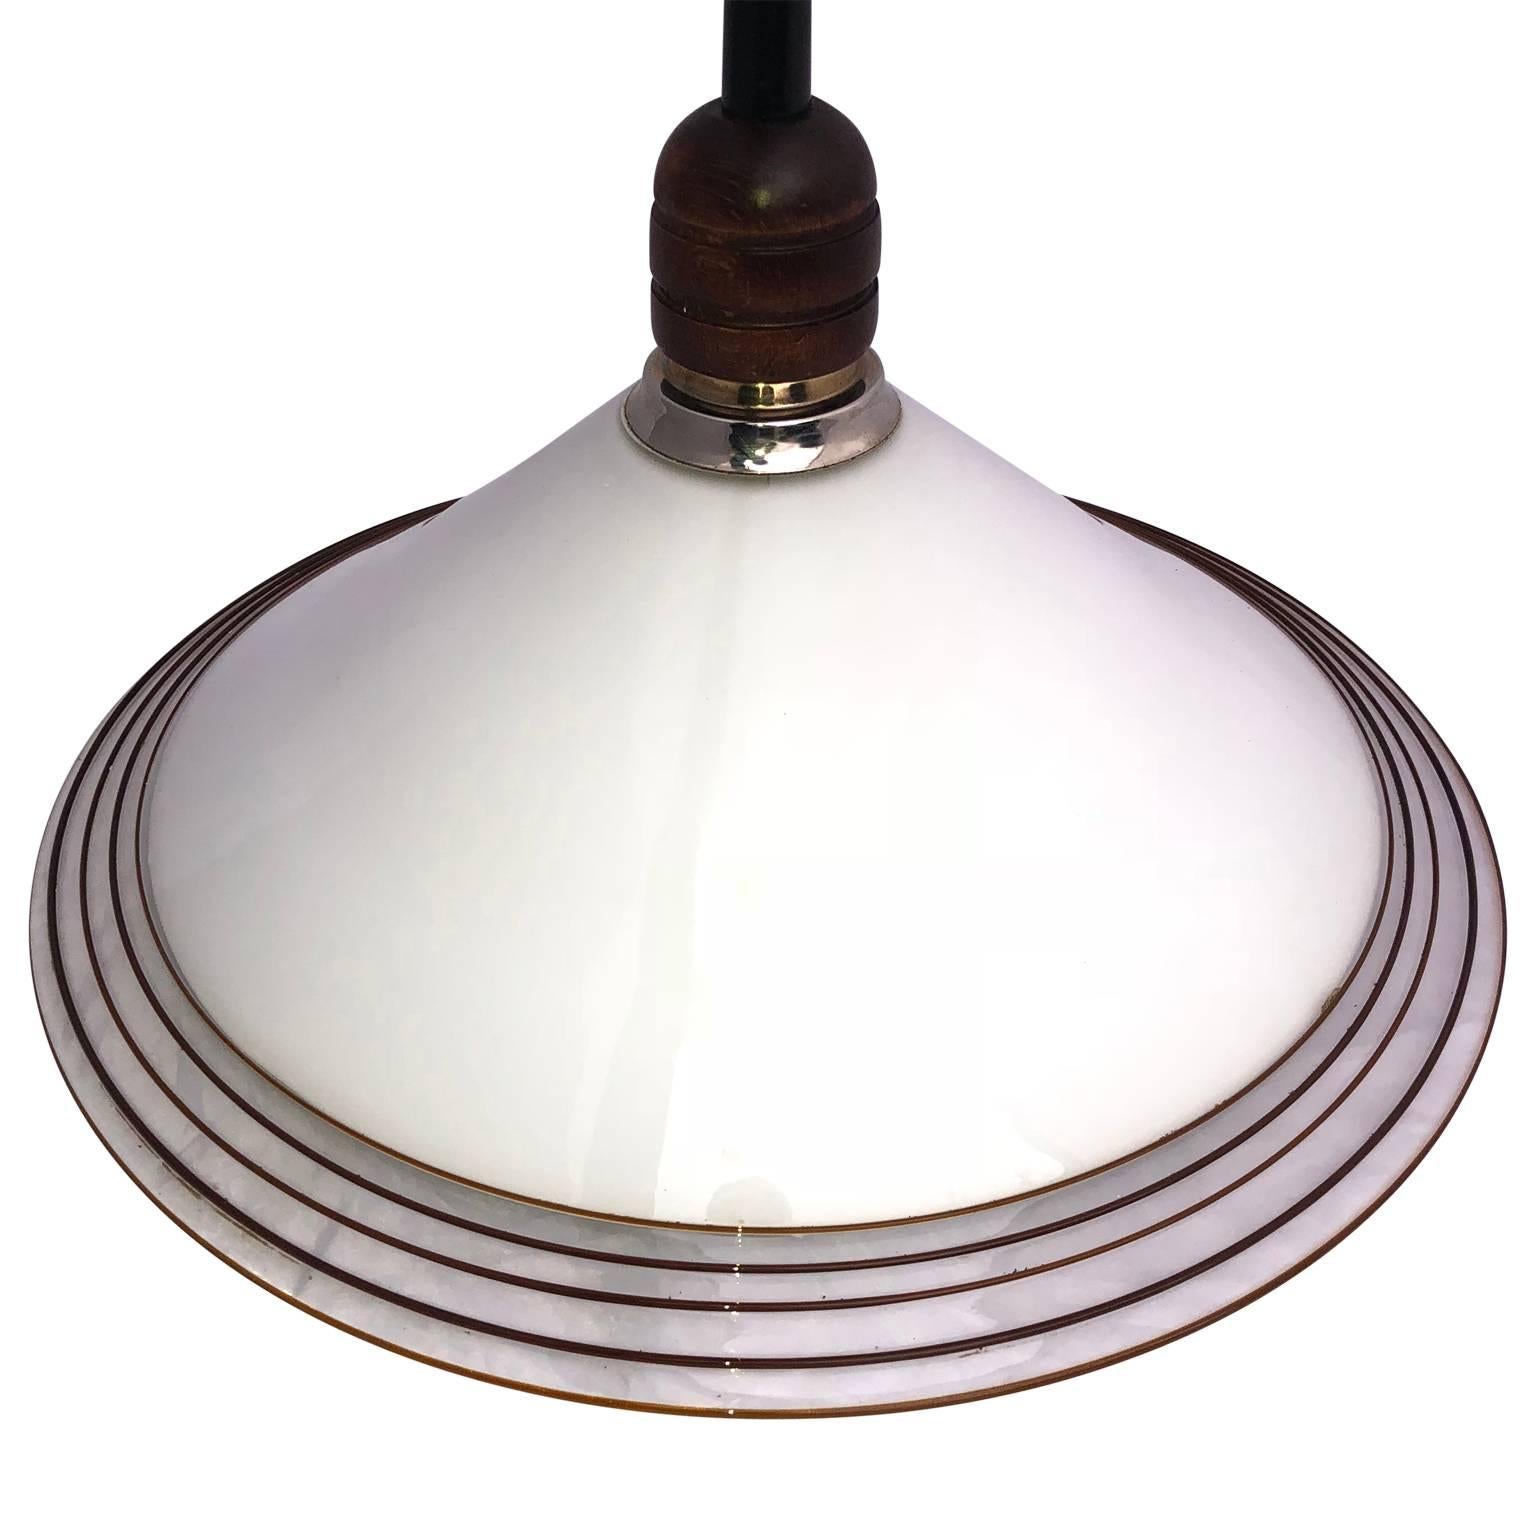 White Italian Murano art glass dish shape swirl pendant light

The white dish design is decorated with dark amber colored swirl. The glass dish has chrome and wood hardware. Newly re-wired.

     